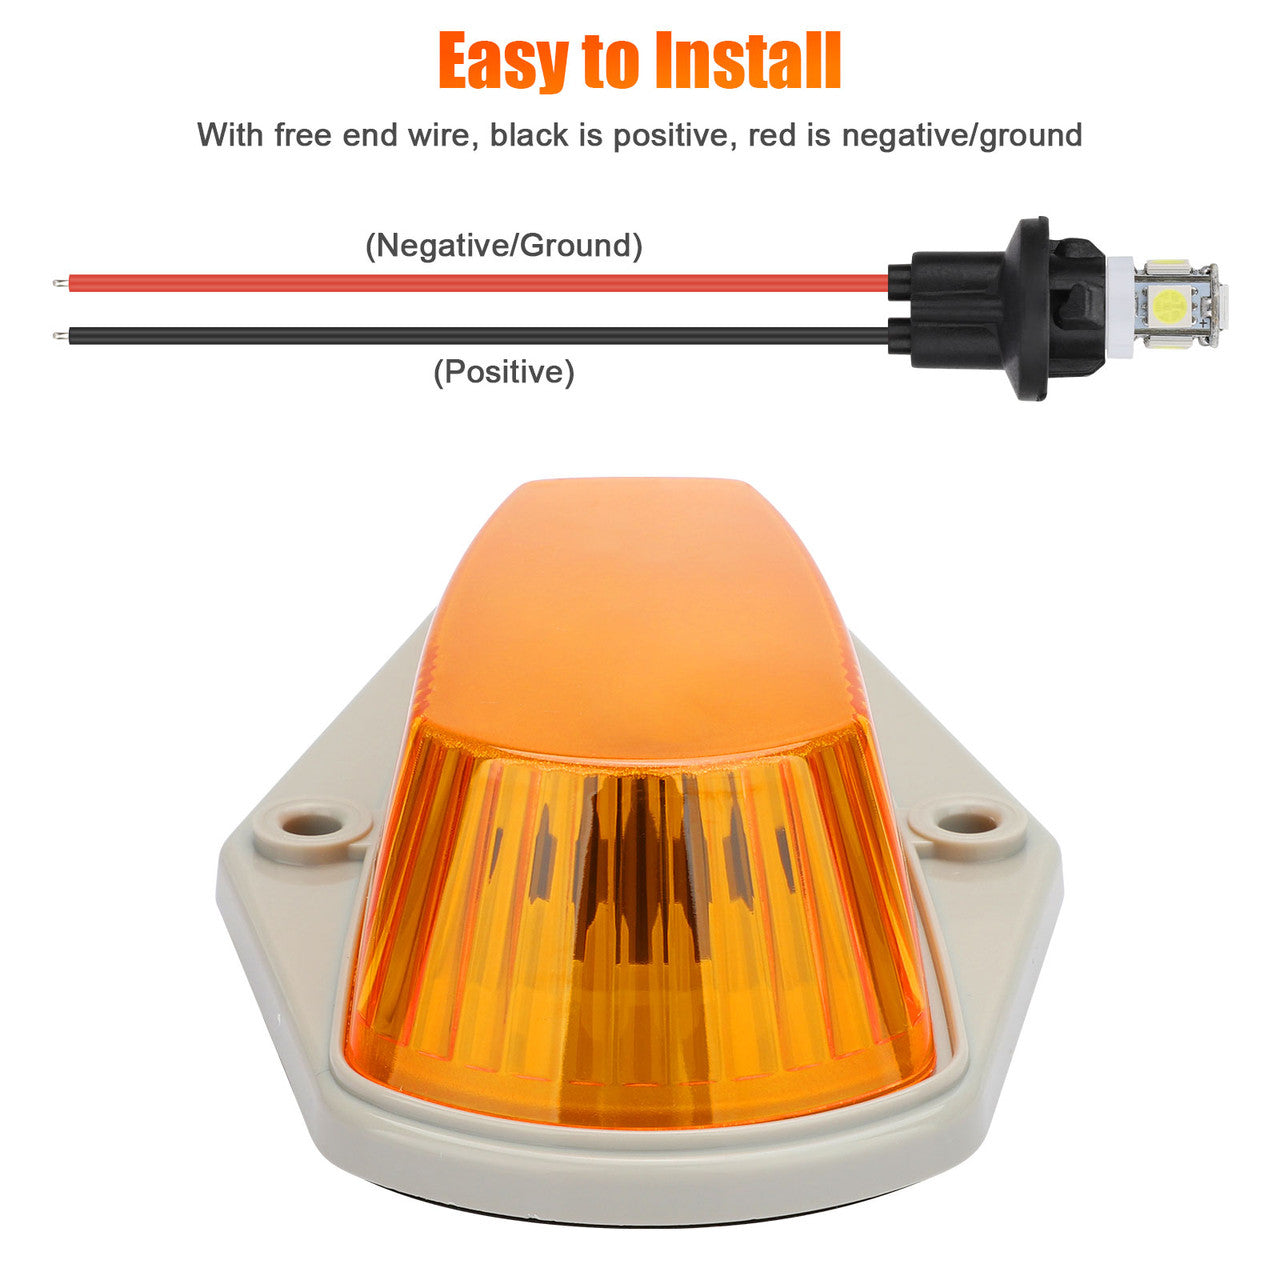 Car Roof Top Light with a T10 Plug Socket, Easy to Install and is compatible with most vehicles,5Pcs